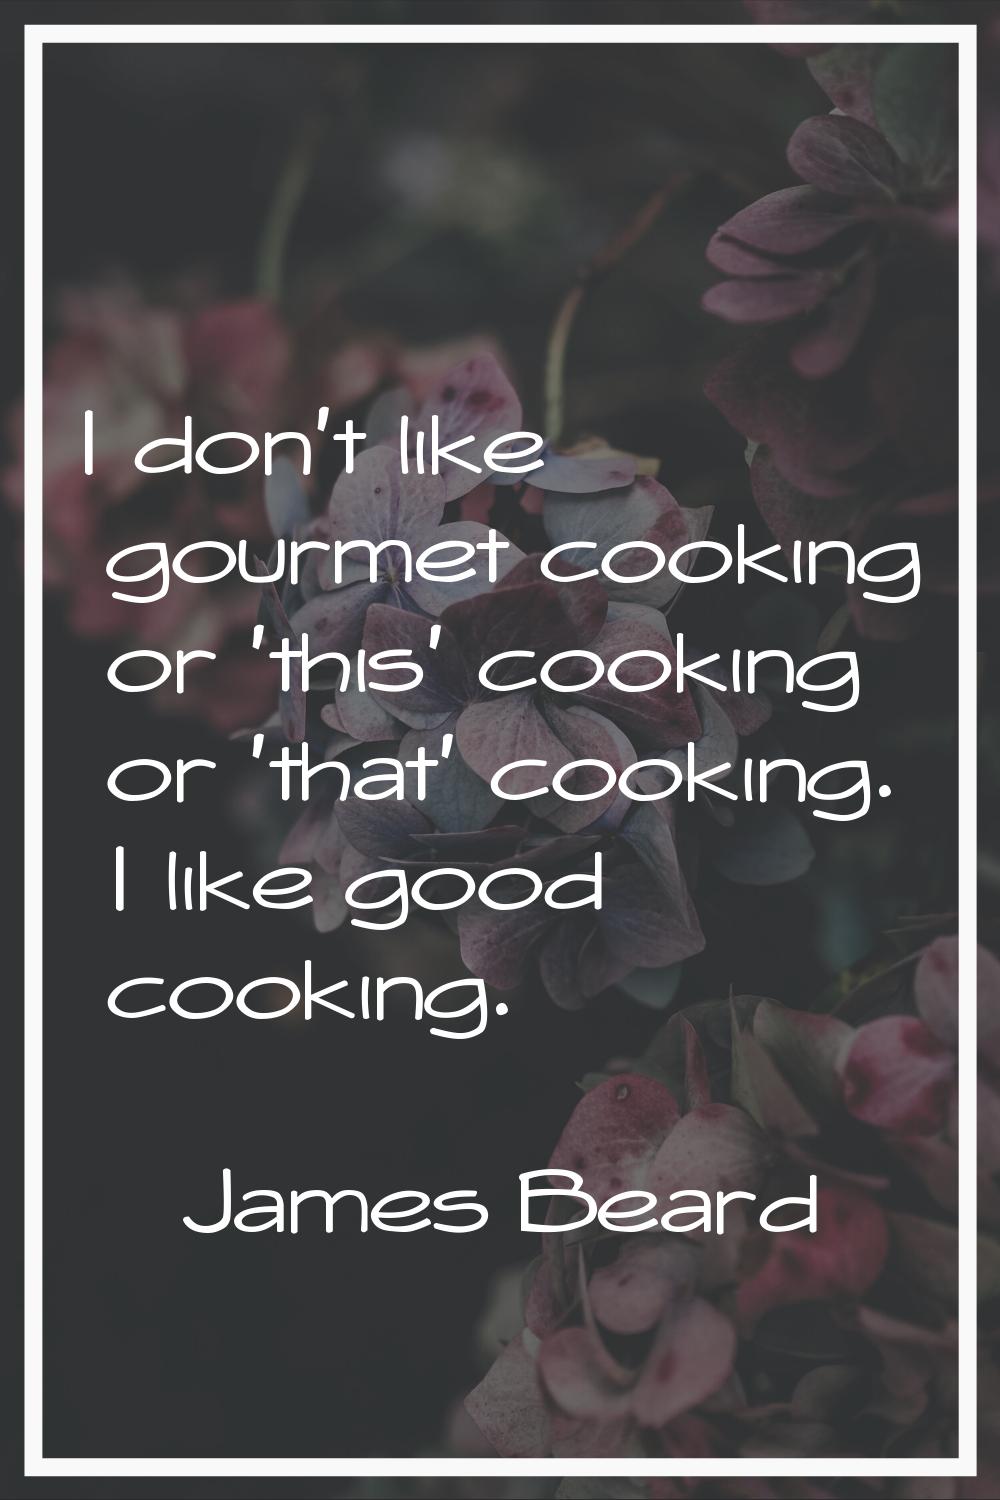 I don't like gourmet cooking or 'this' cooking or 'that' cooking. I like good cooking.